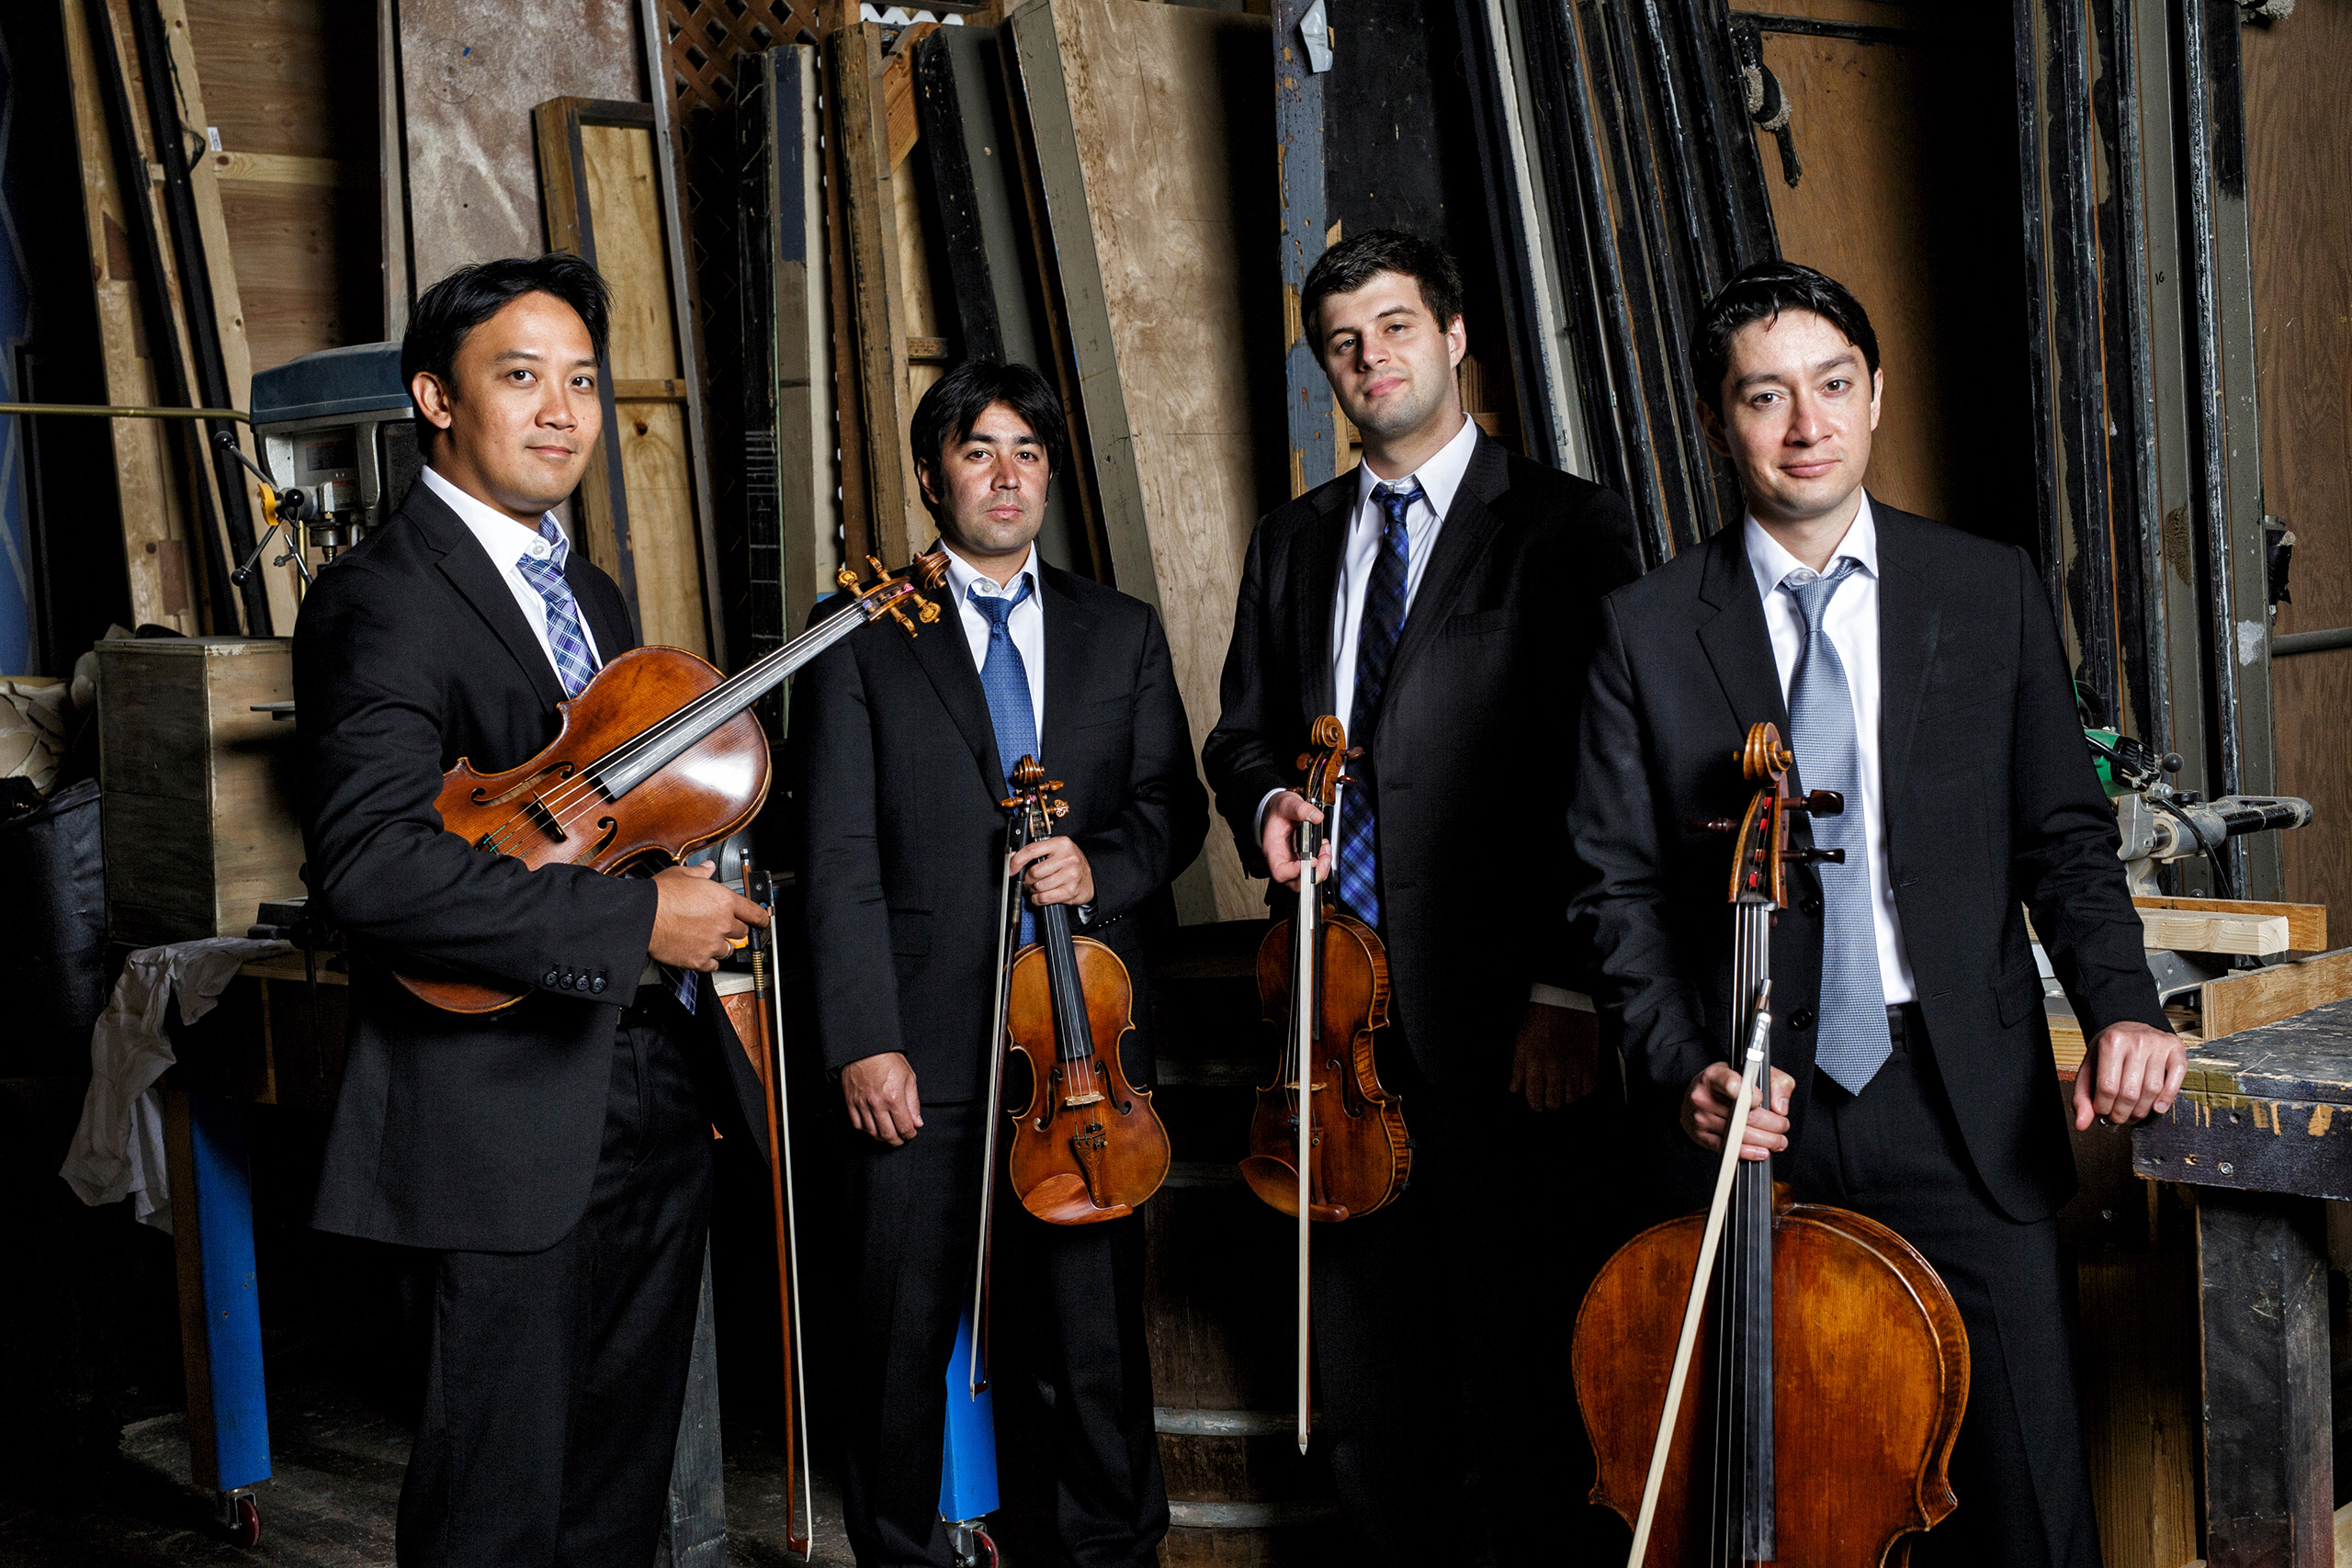 Baumer String Quartet returns to UNT College of Music for residency and recitals